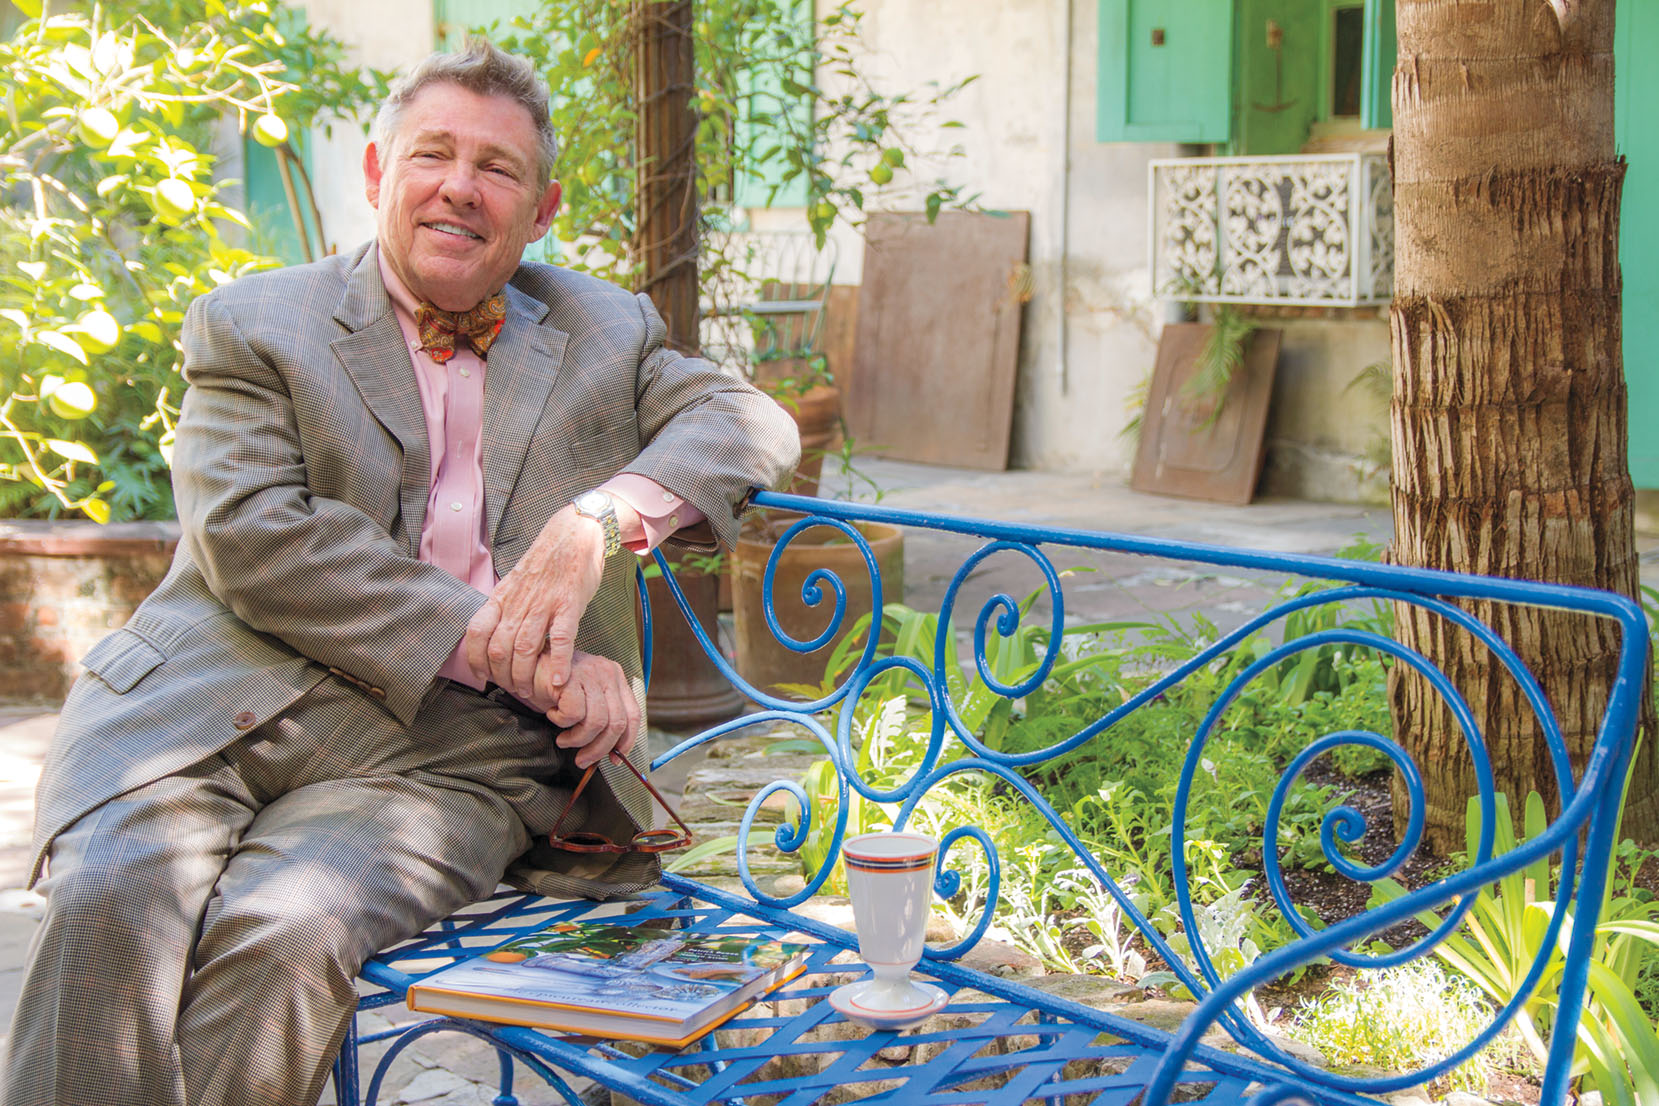 Portrait of New Orleans interior decorator and antiques shop owner Patrick Dunne, wearing a gray suit with pink shirt, sitting outside a wrought-iron bench painted bright blue